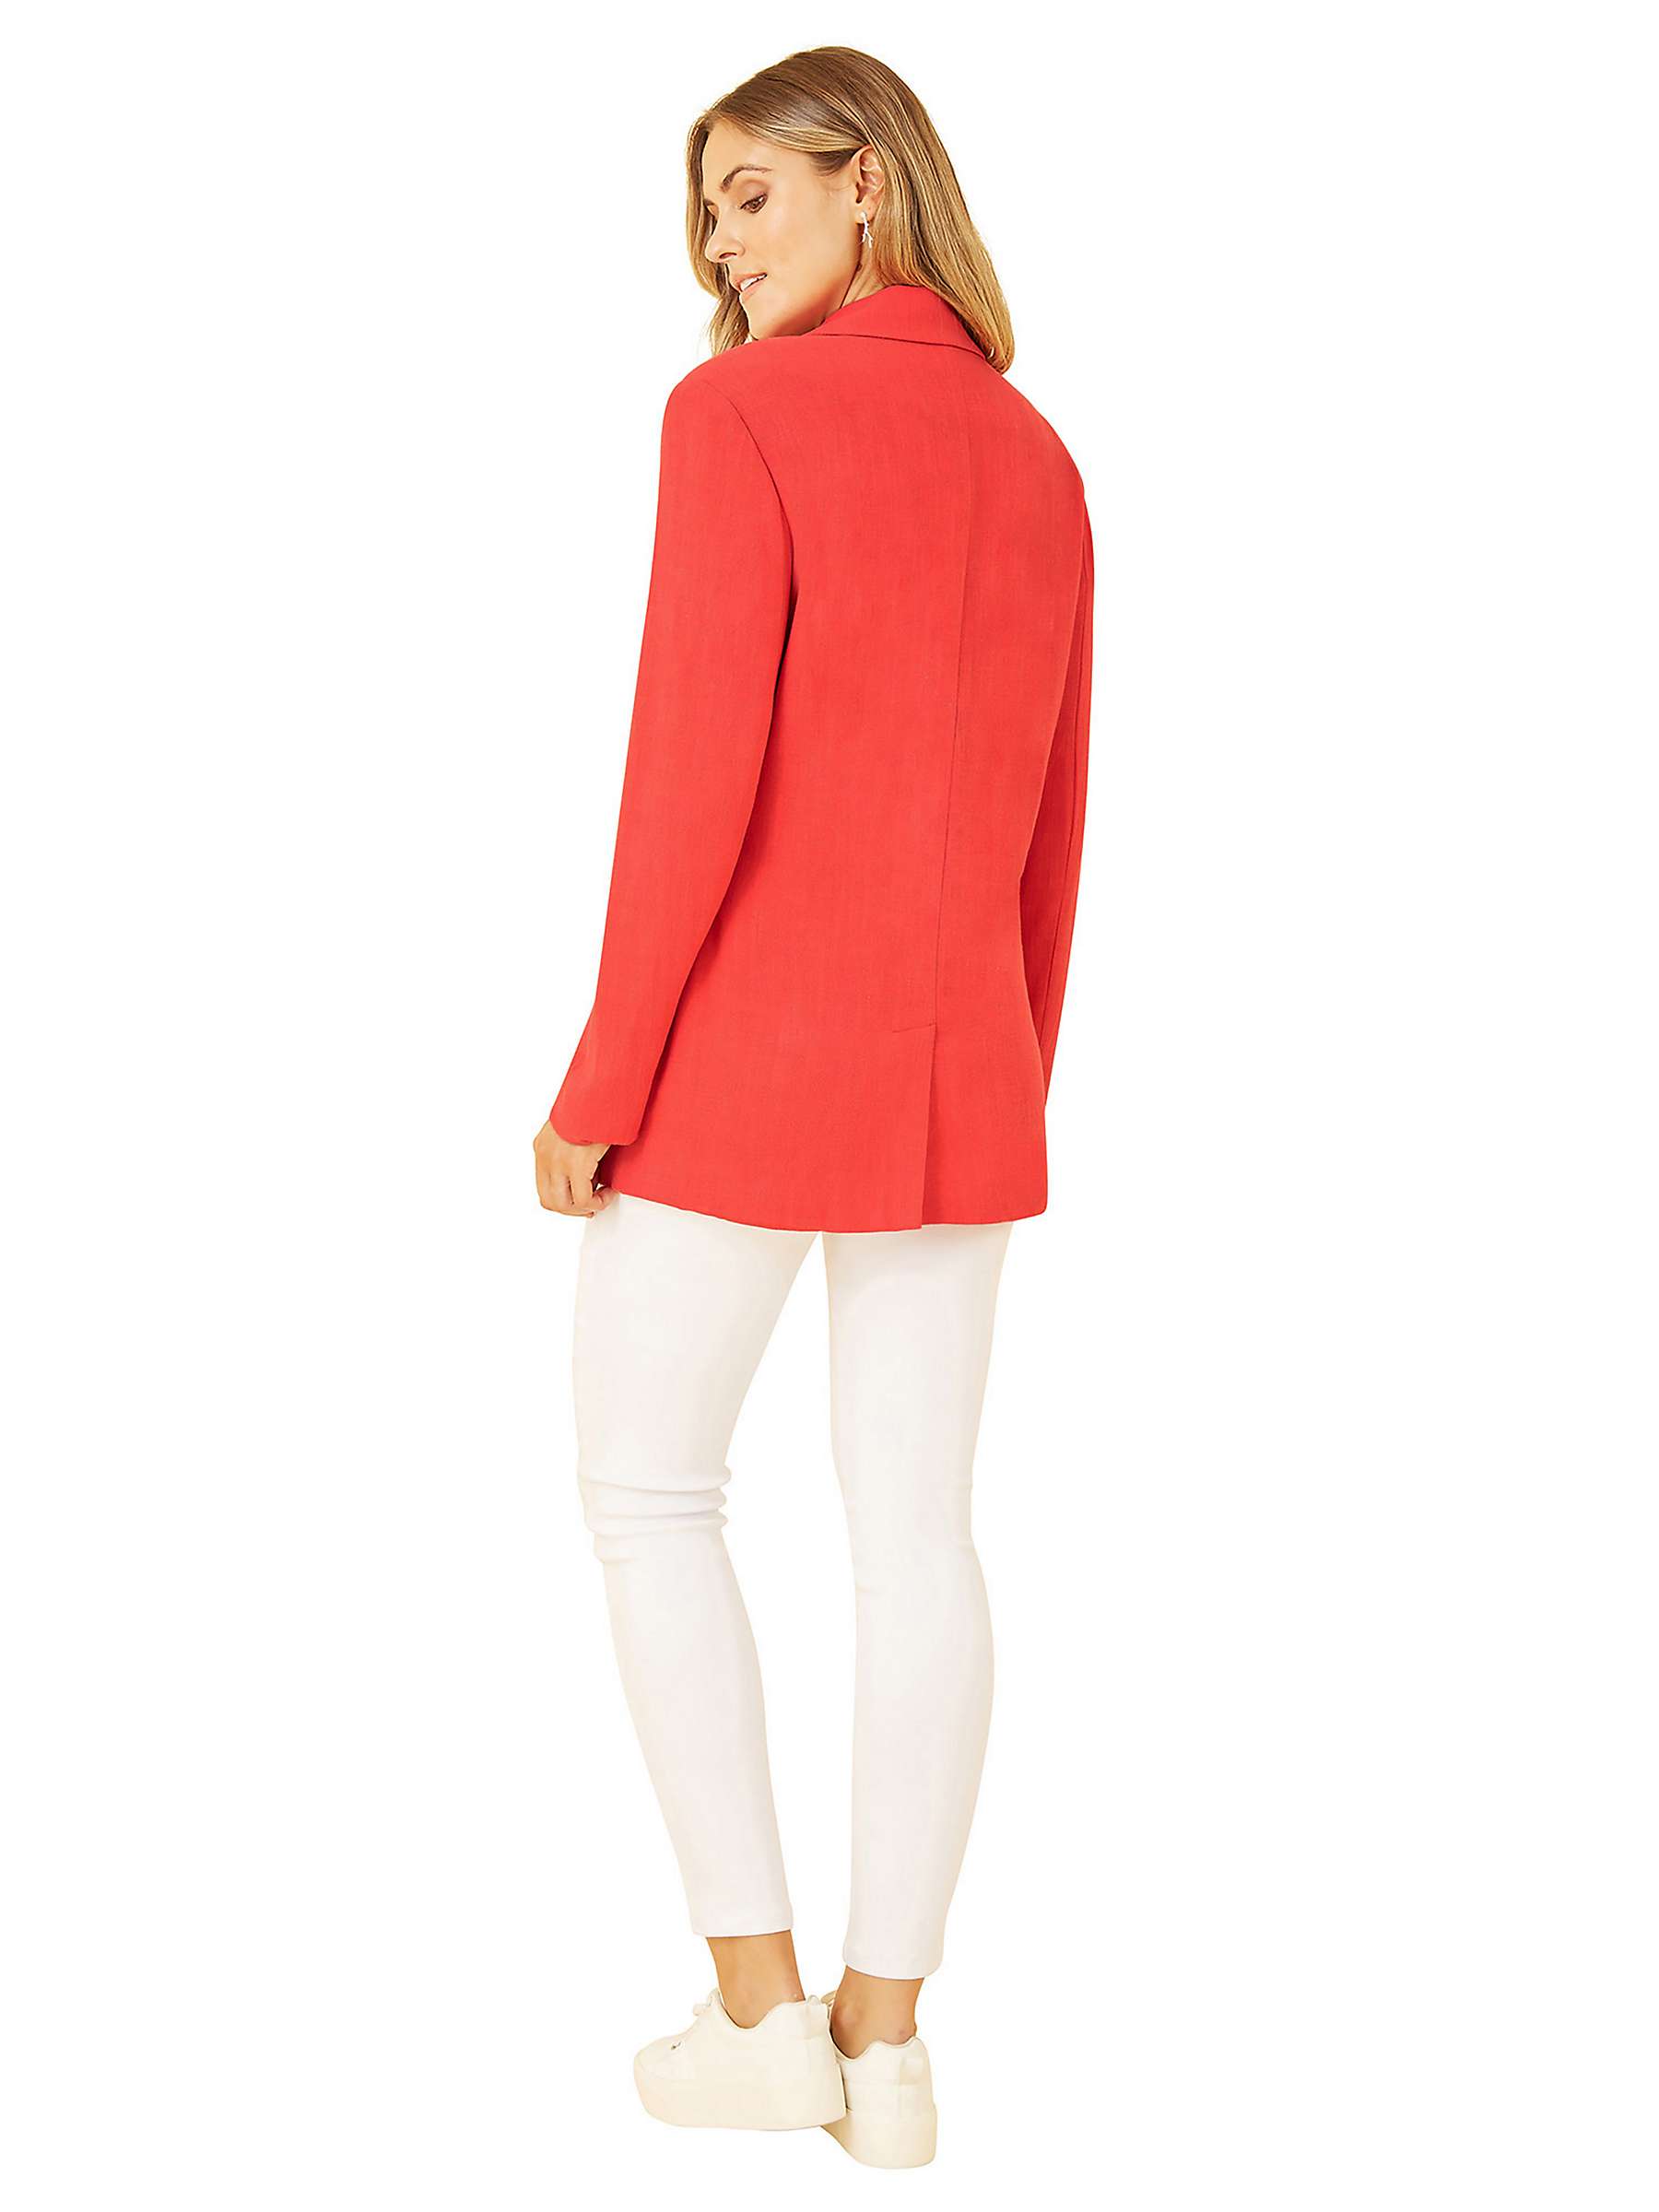 Buy Yumi Relaxed Fit Blazer, Red Online at johnlewis.com